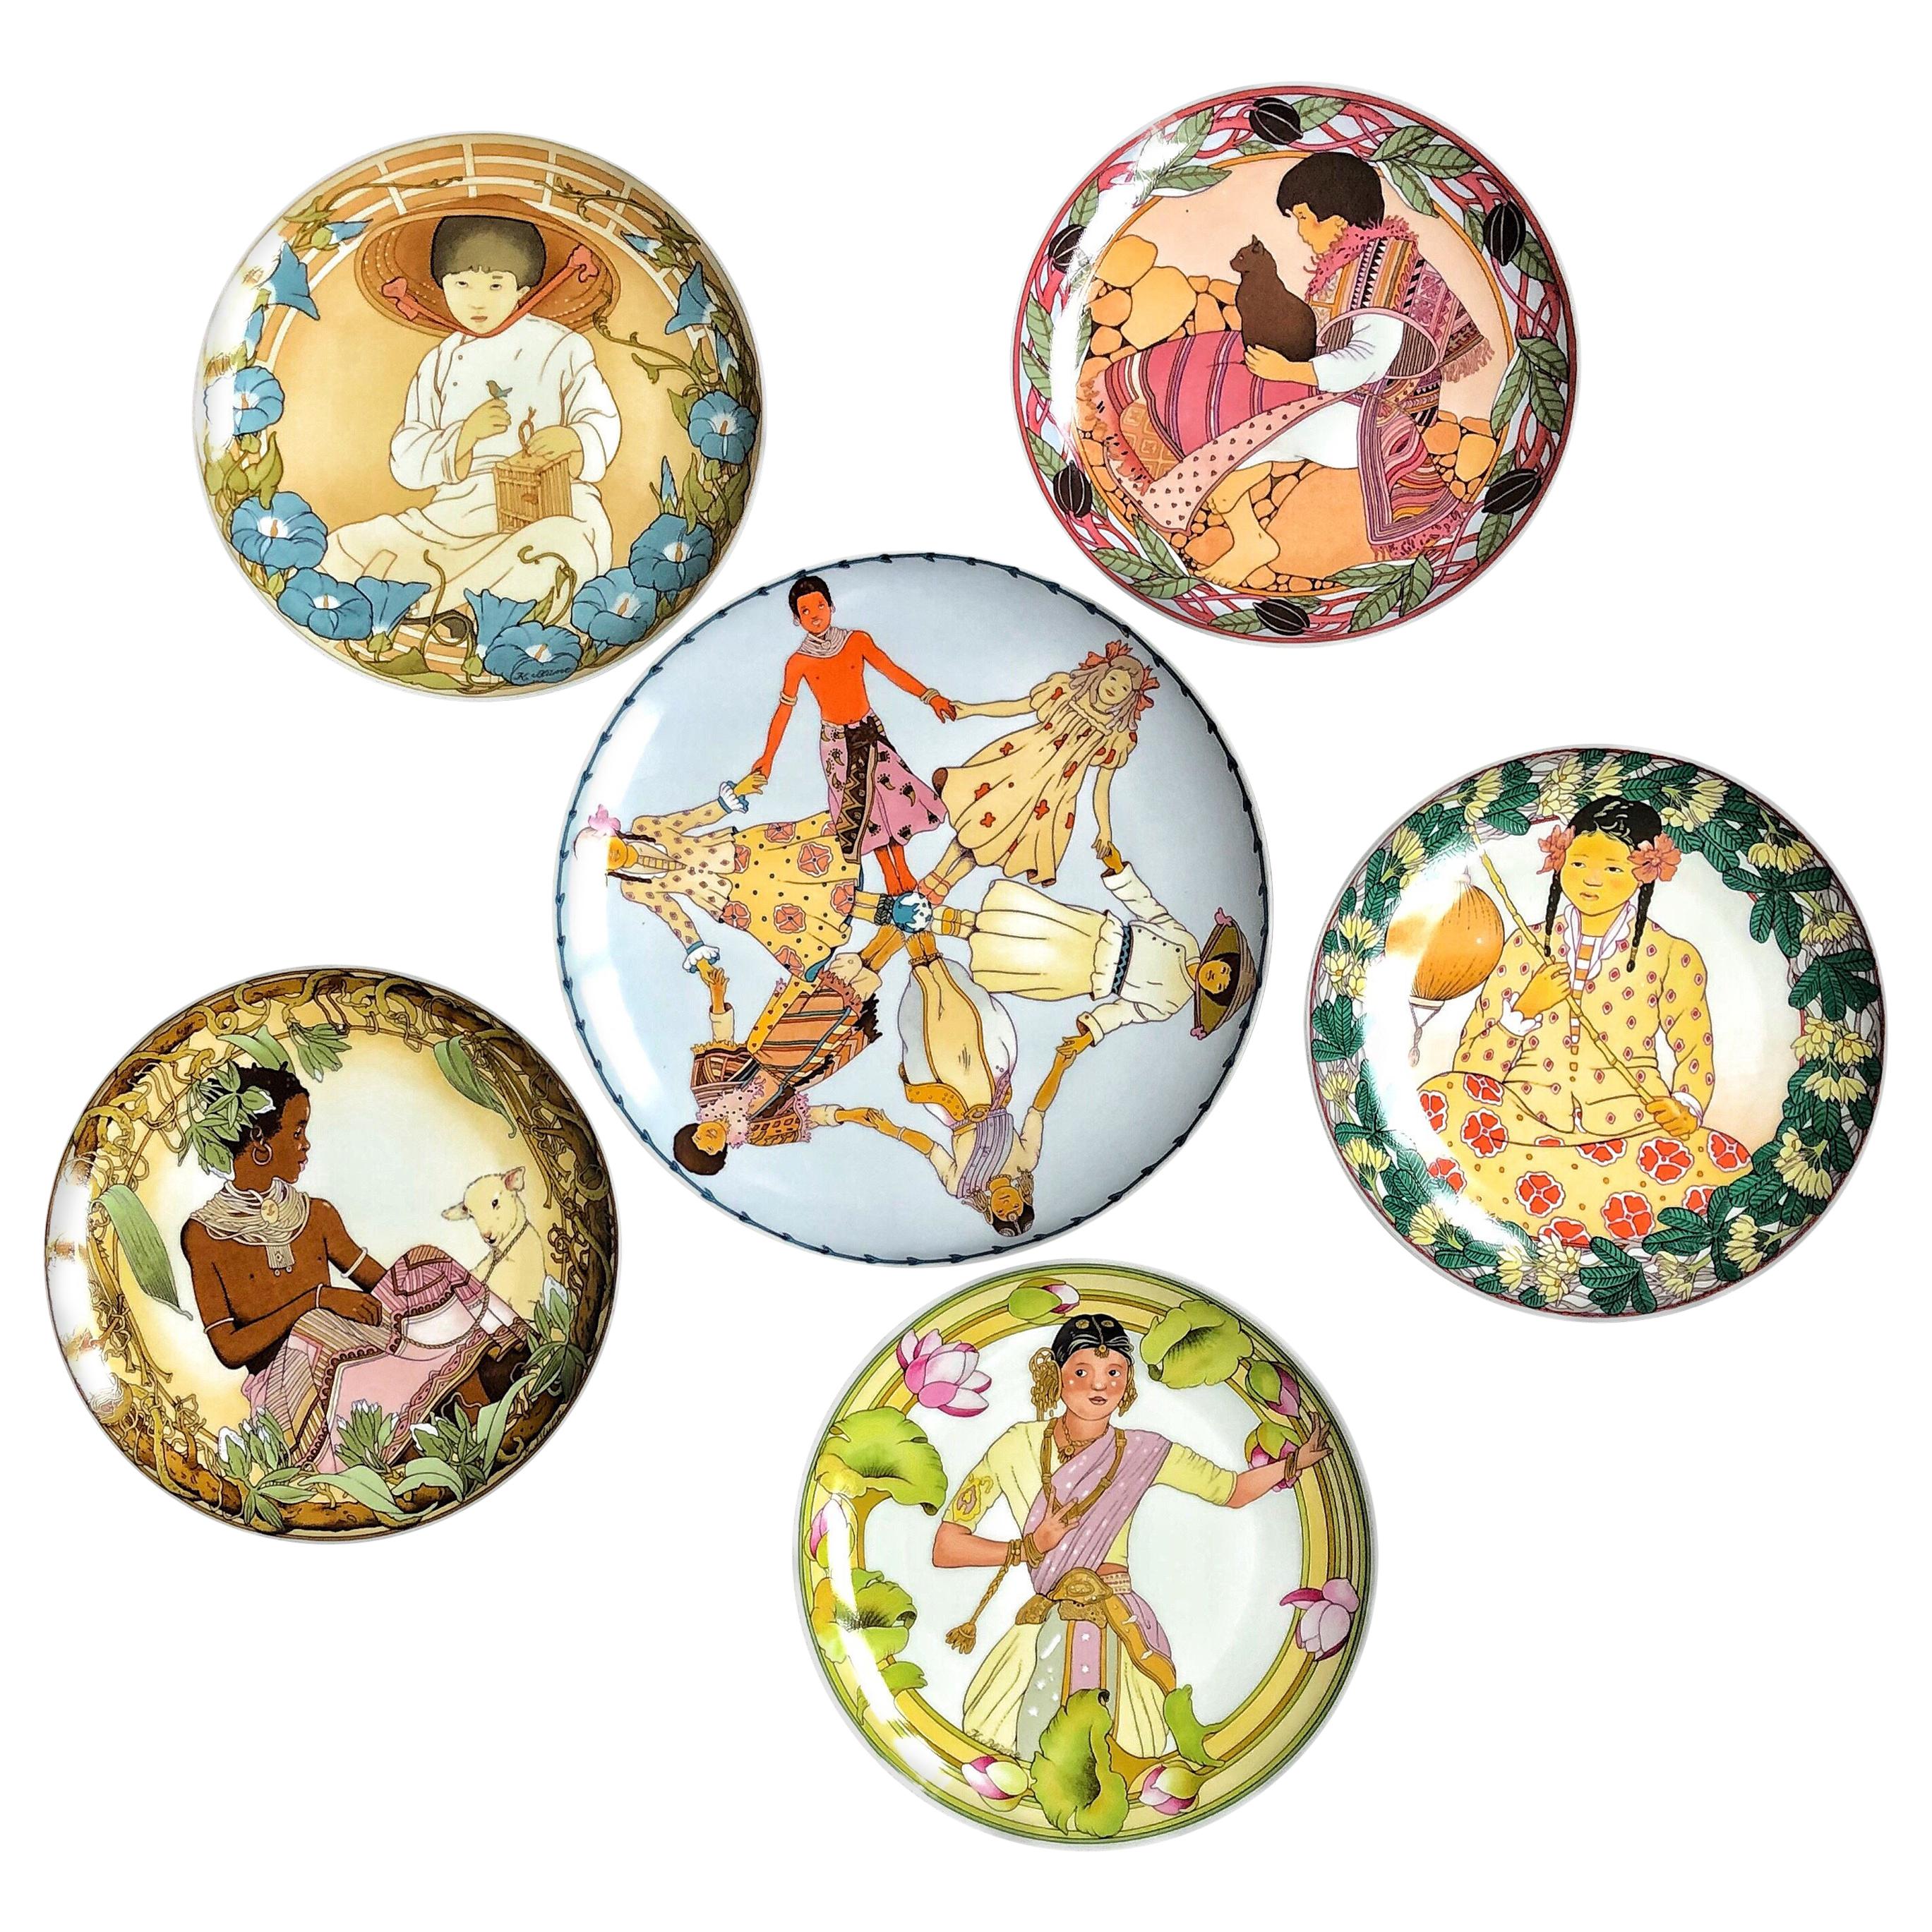 6 Plates “Children of the World” Villeroy and Boch 1979 for Unicef, Germany  SALE at 1stDibs